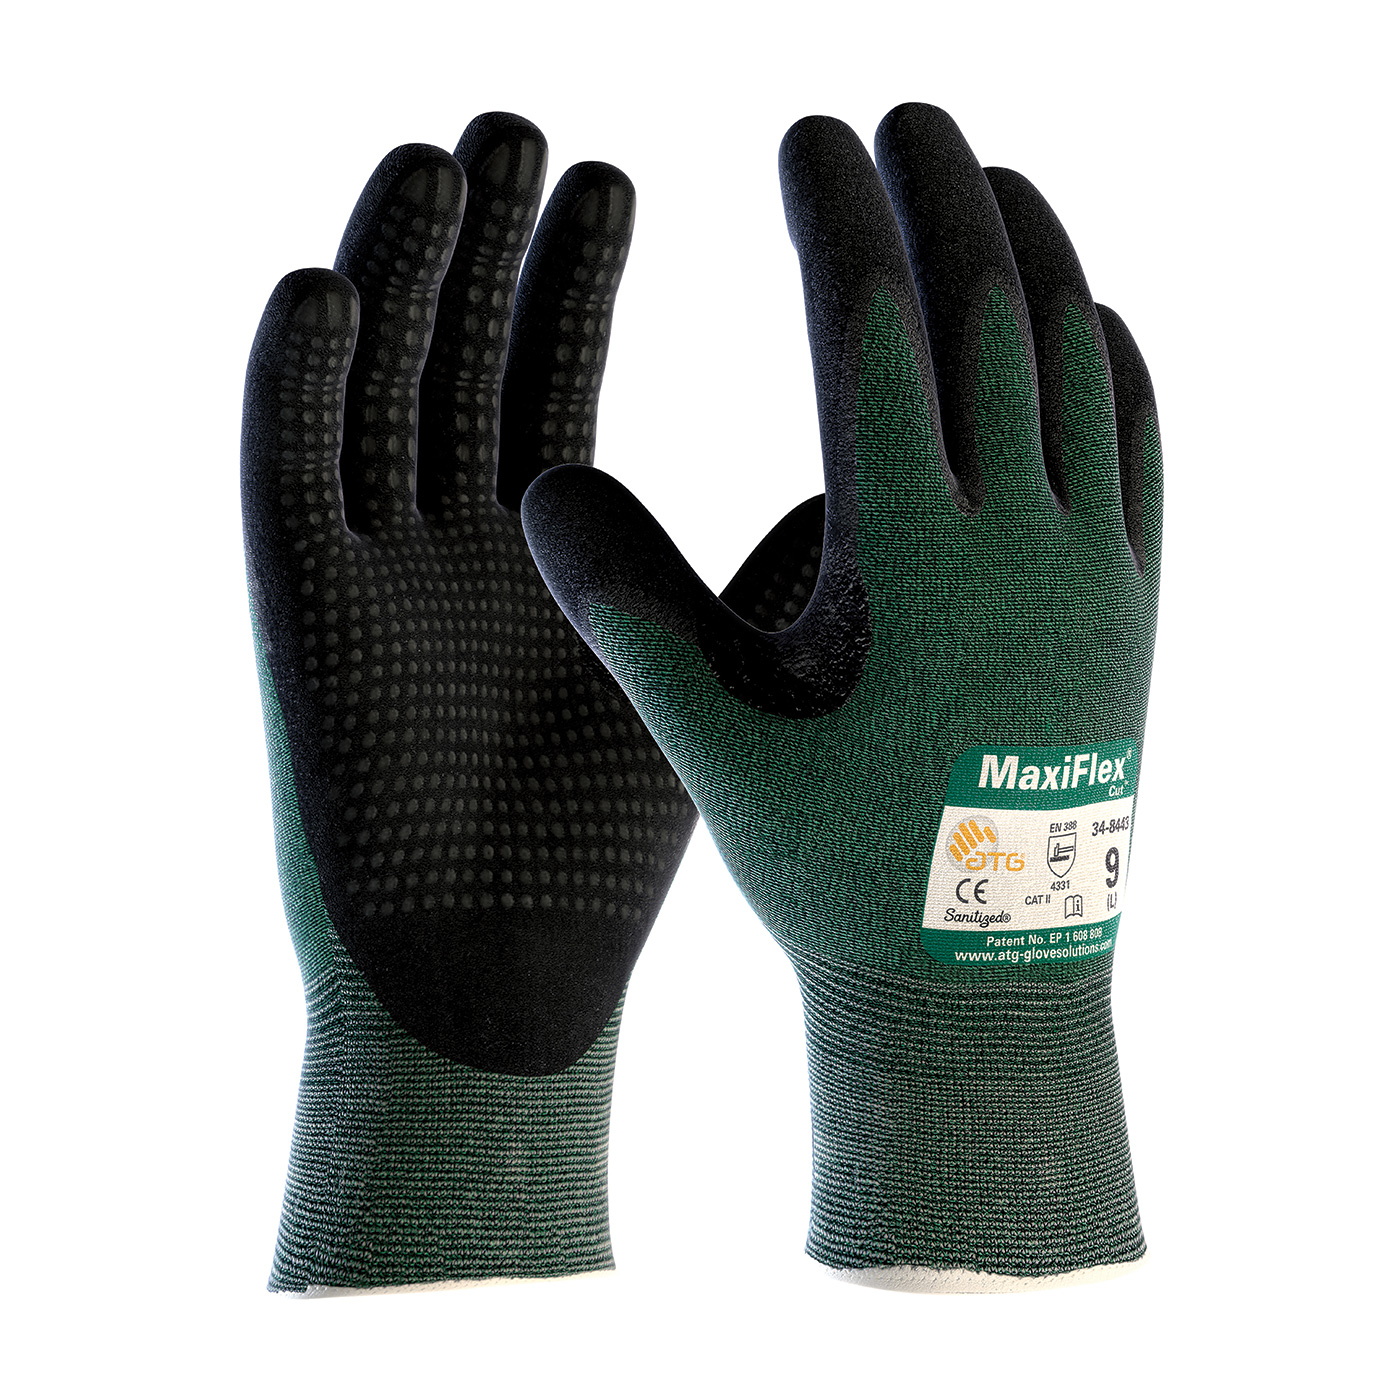 PIP 34-8443/L MaxiFlex Cut Seamless Knit Engineered Yarn Glove with Premium Nitrile Coated MicroFoam Grip on Palm & Fingers - Micro Dot Palm - Large PID-34 8443 L